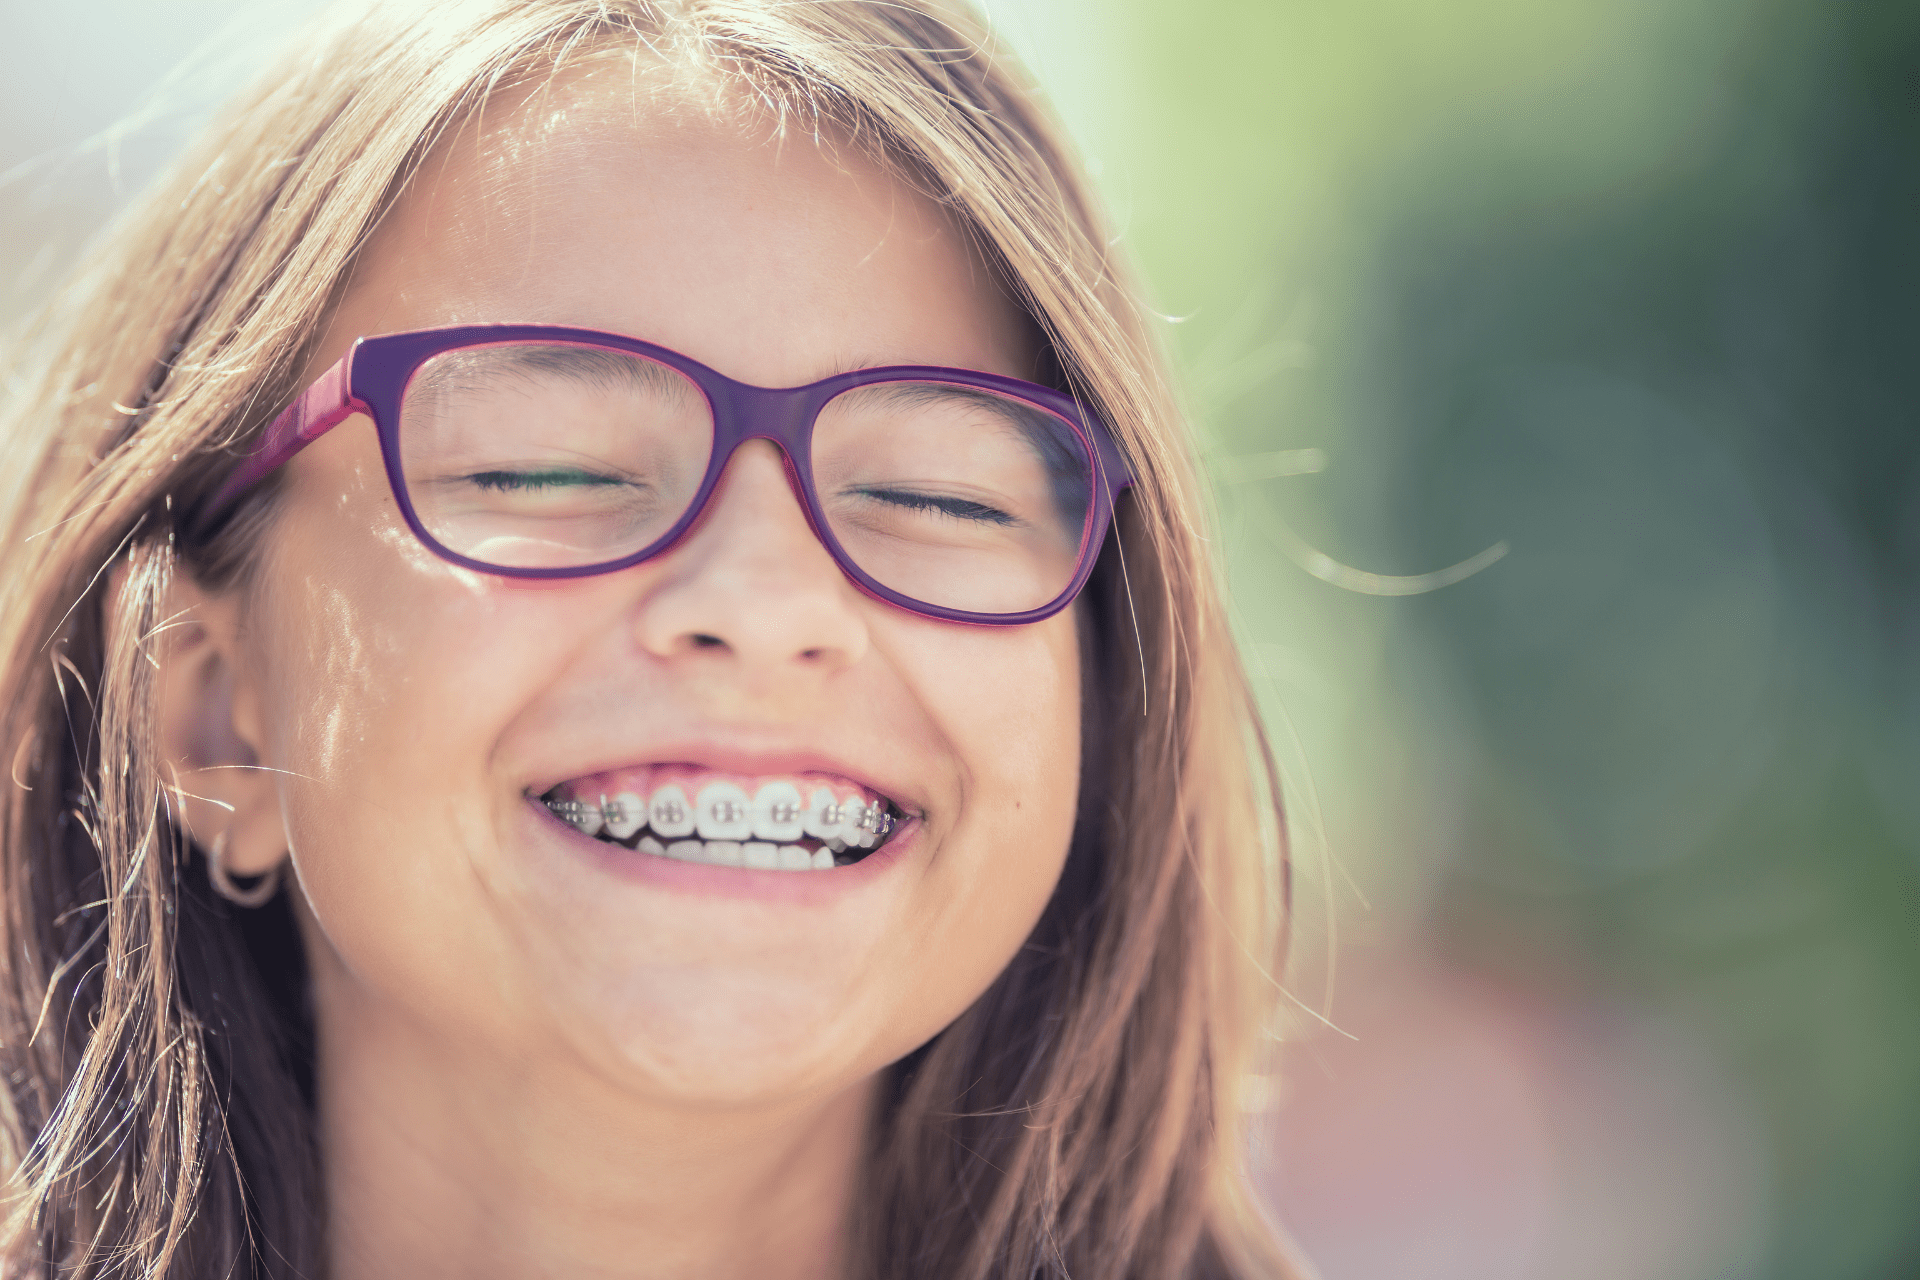 young girl with new braces smiling about starting orthodontic treatment